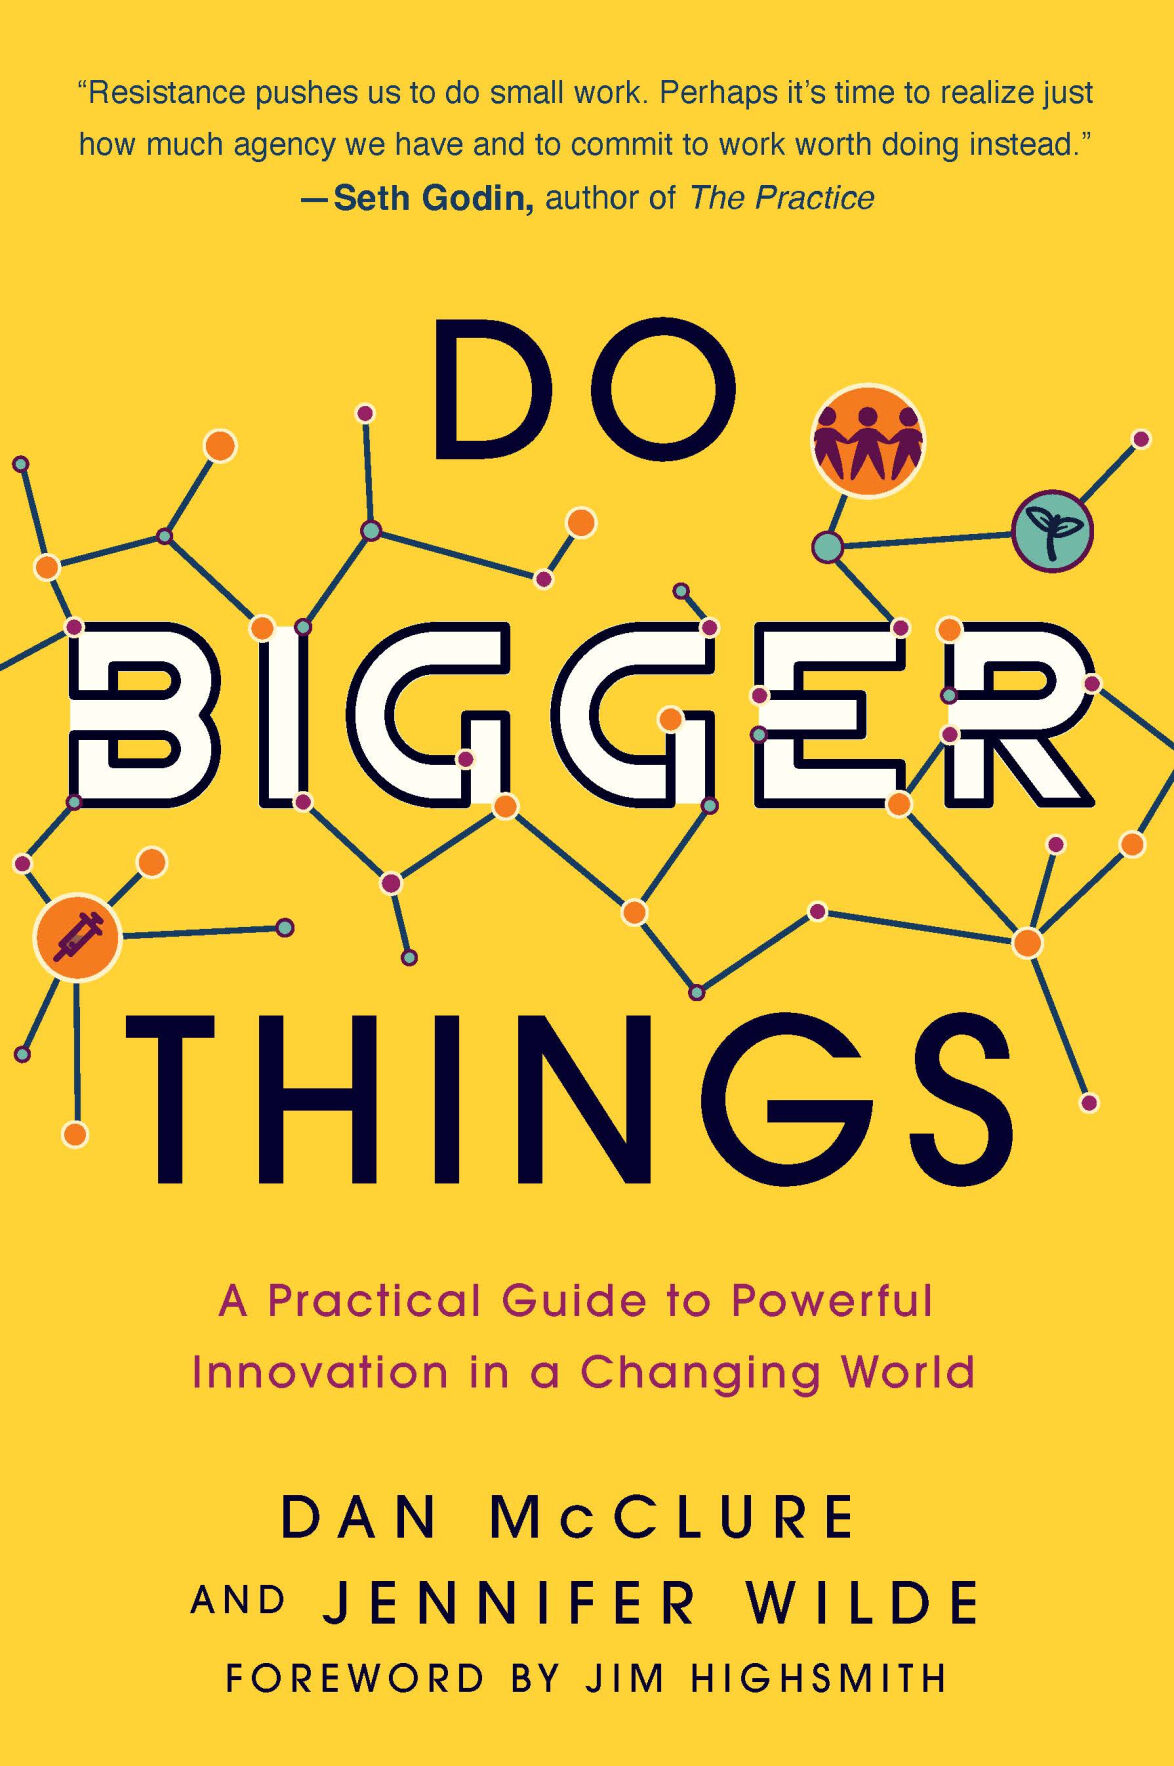 <p>Do Bigger Things by Dan McClure and Jennifer Wilde (Graphic: Business Wire)</p>   PHOTO CREDIT: Business Wire